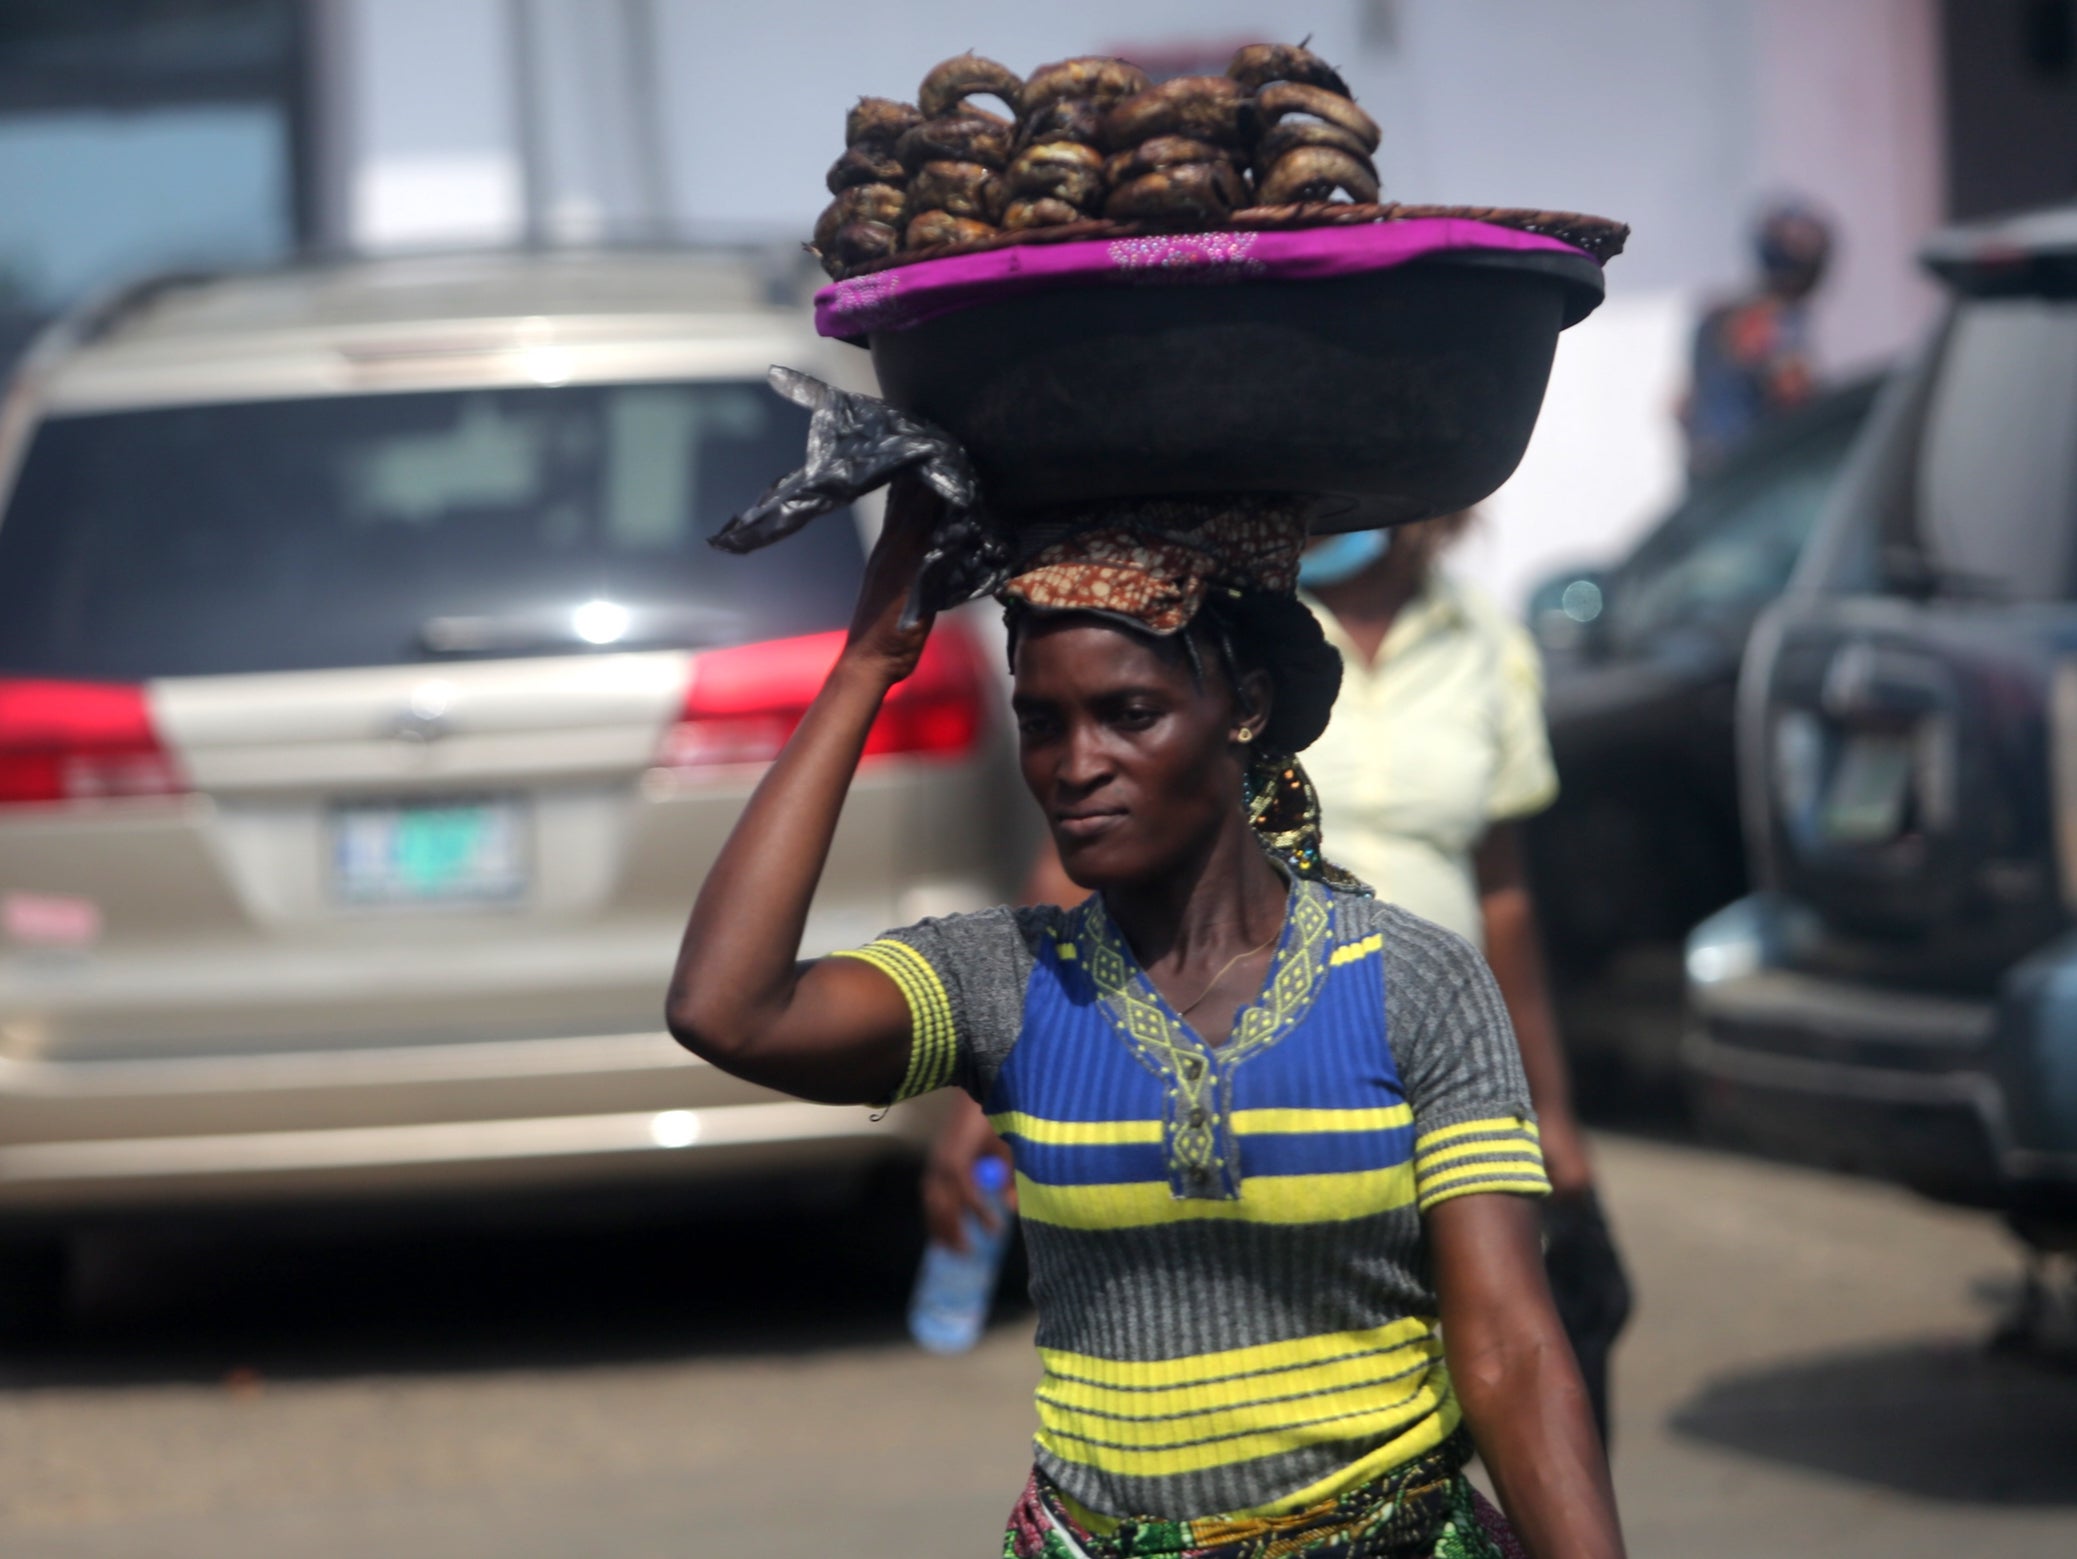 A woman hawks smoked fish displayed on a plastic bowl along a road in Oyingbo district of Lagos, Nigeria